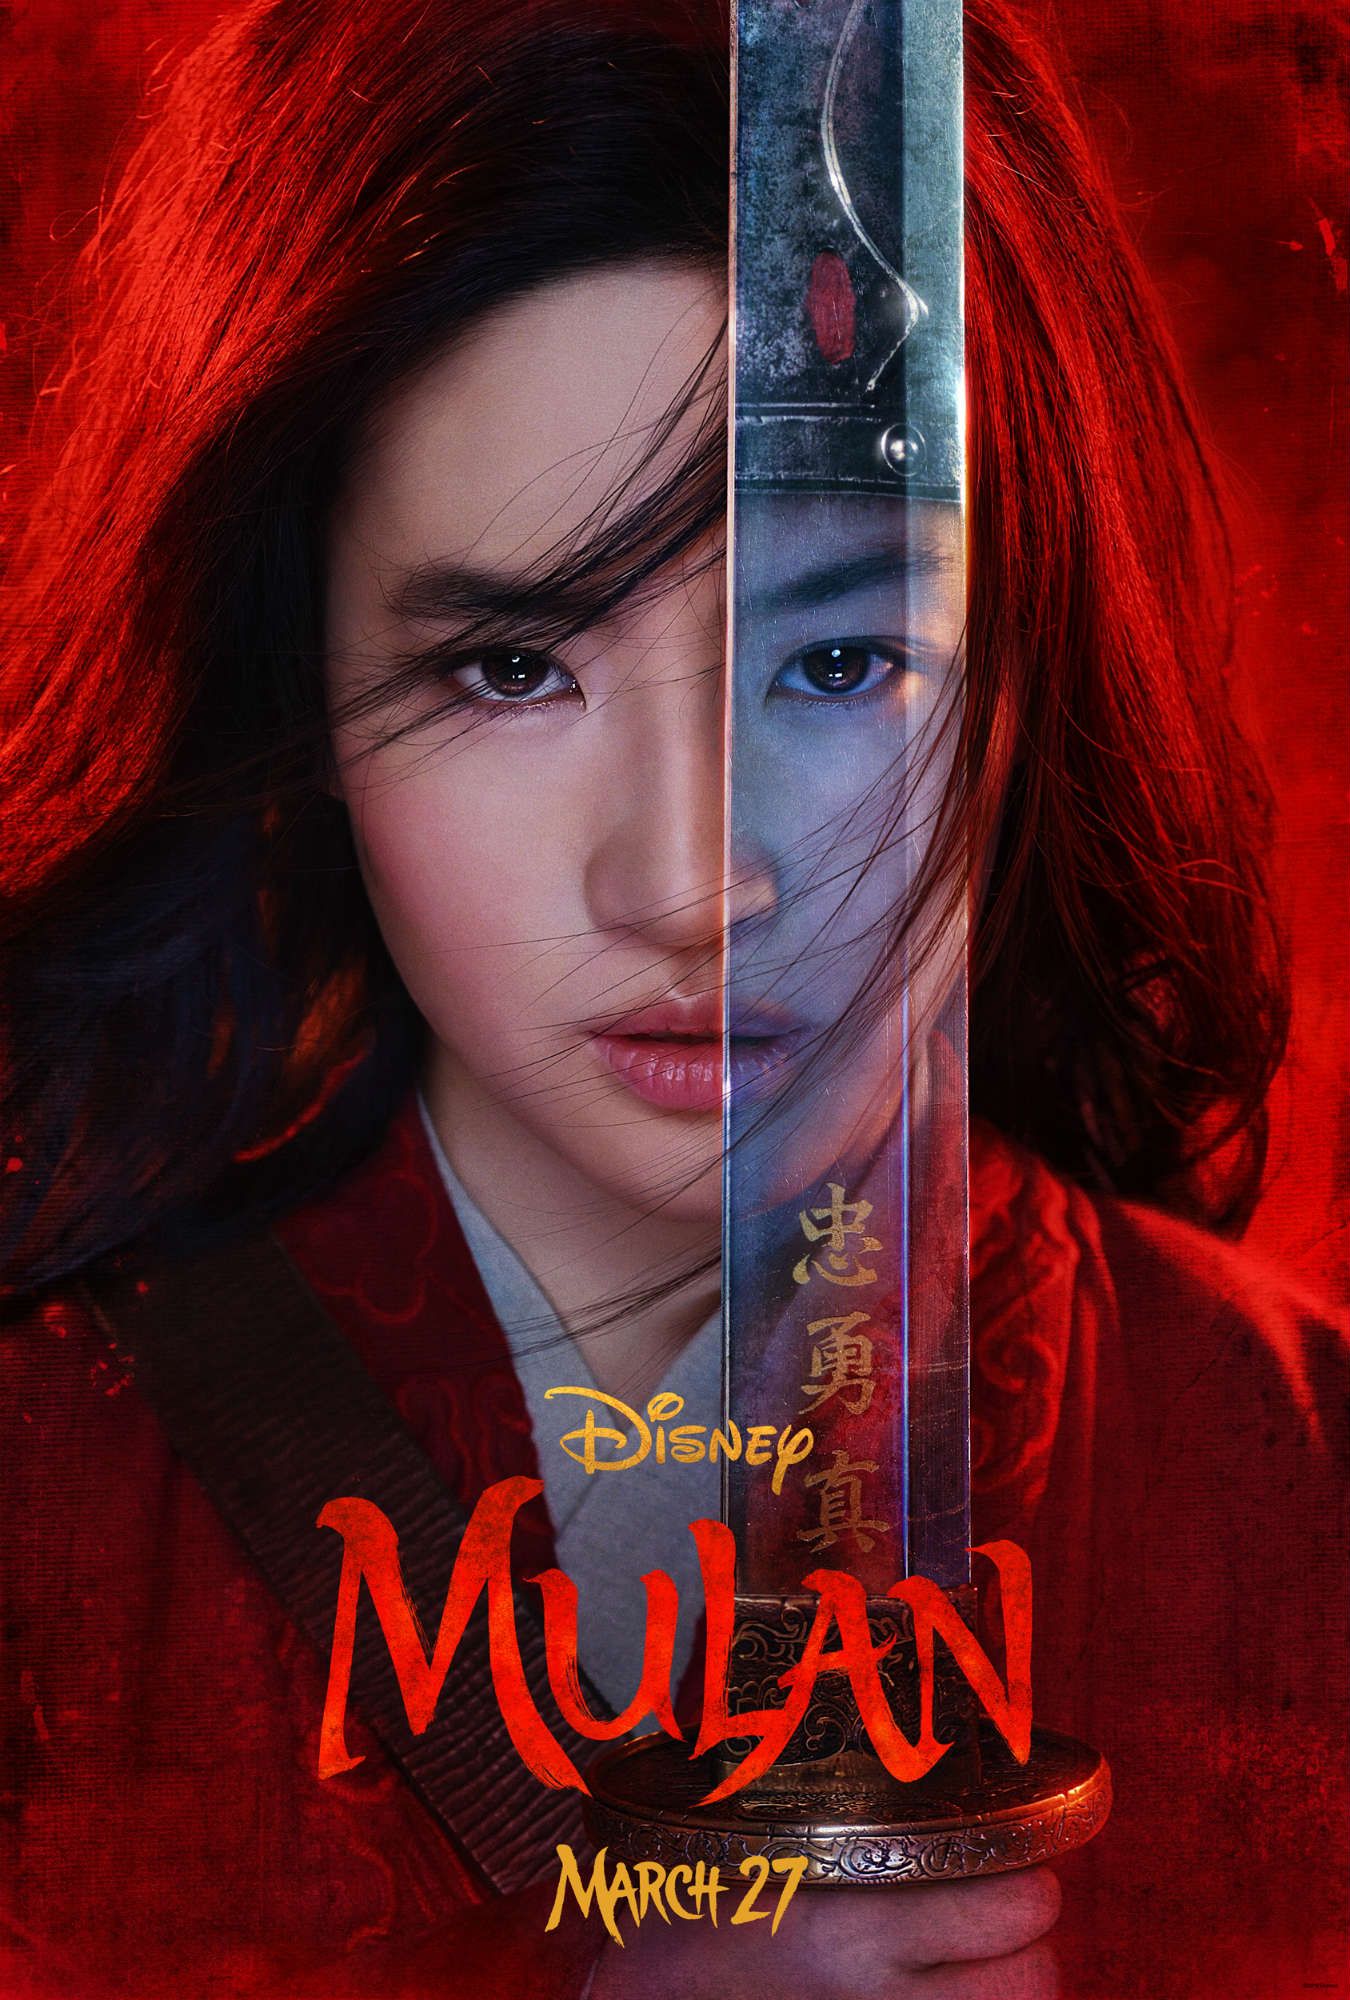 Disney Defends Mulan Filming Near Internment Camps In China